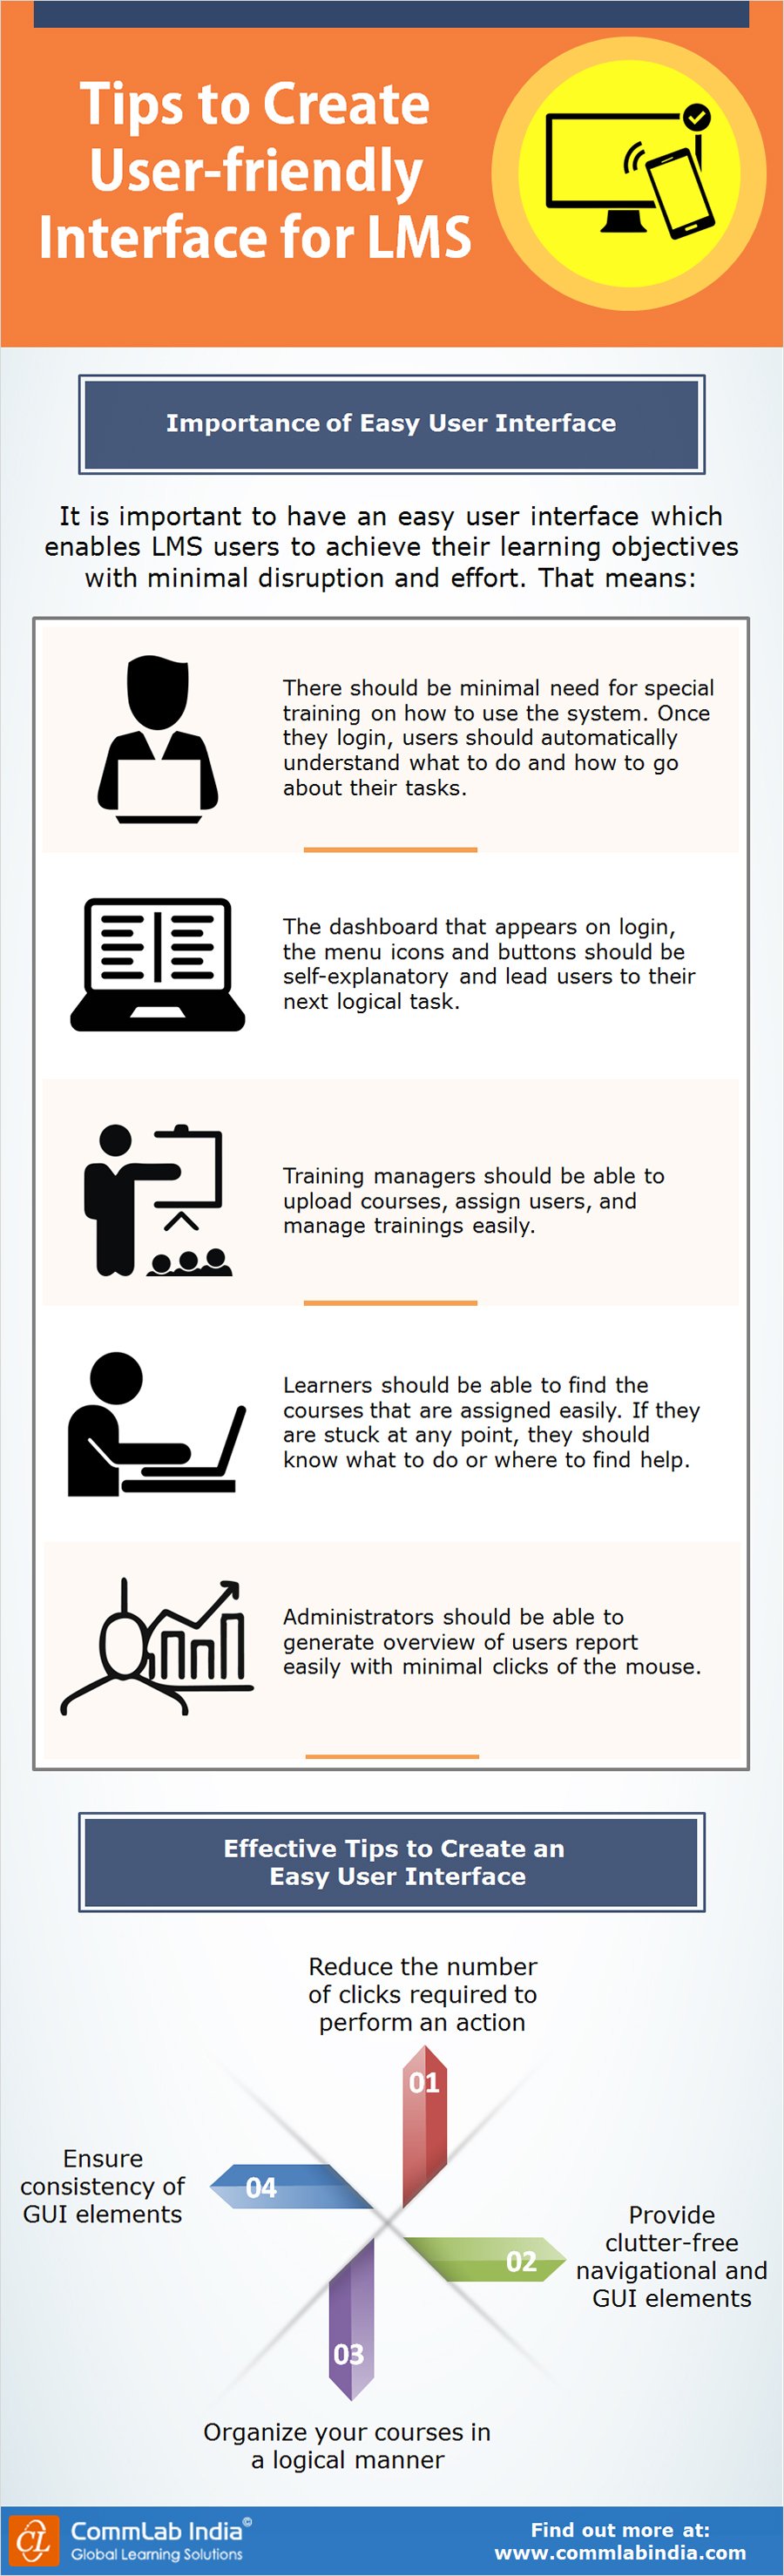 Tips to Create User-friendly Interface for LMS [Infographic]